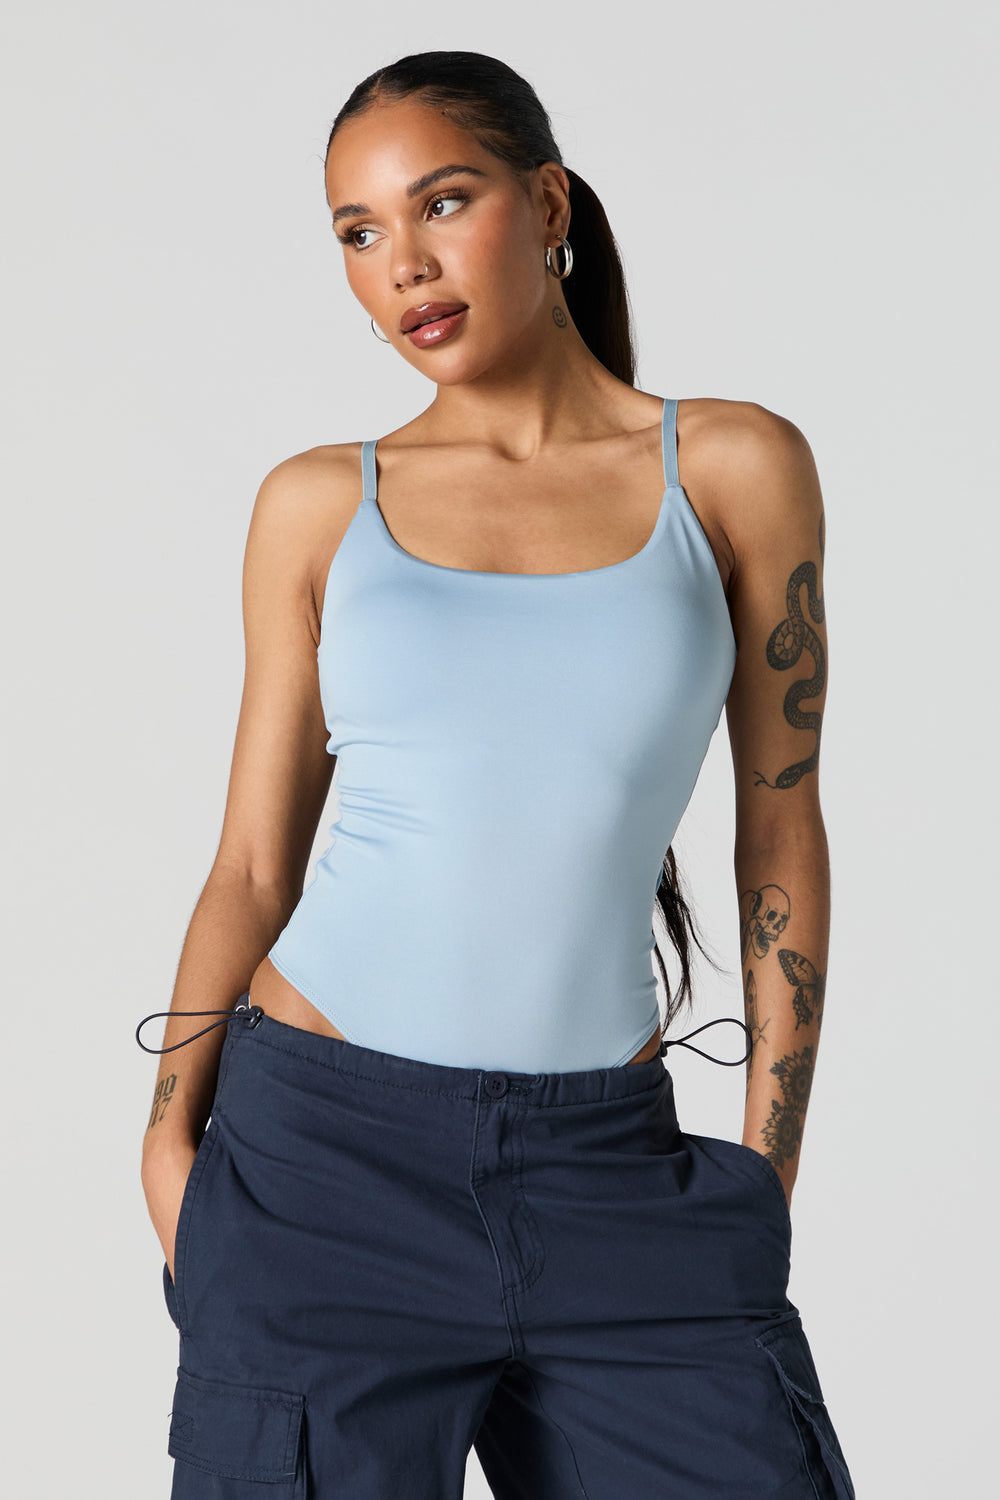 Contour Cami with Built In Cups Contour Cami with Built In Cups 14